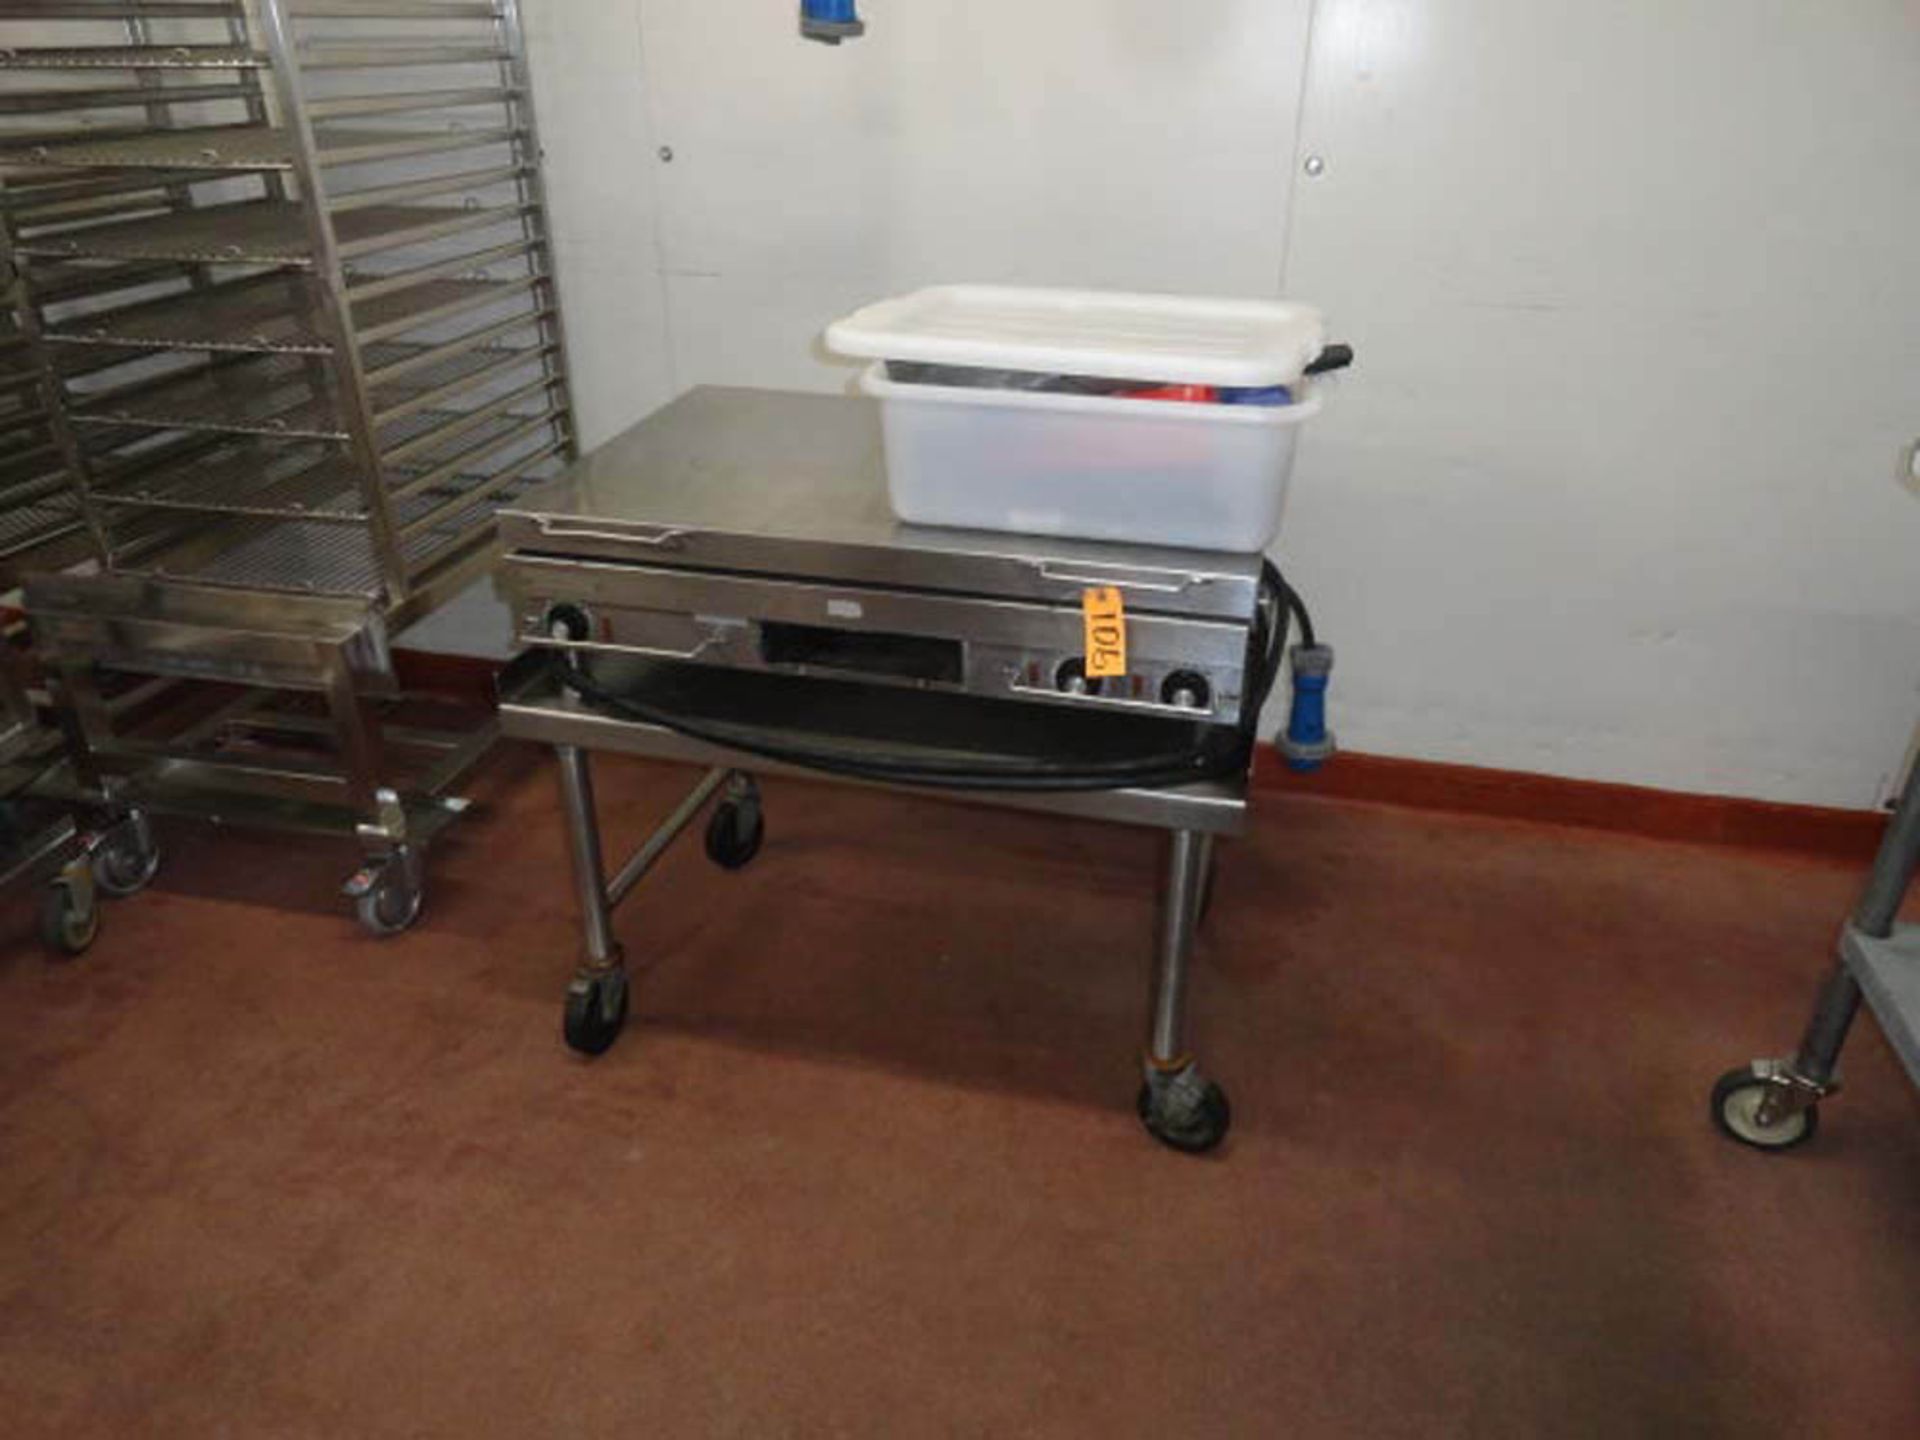 TOASTMASTER GRIDDLE, 30" ON STAINLESS STEEL CART, ELECTRIC